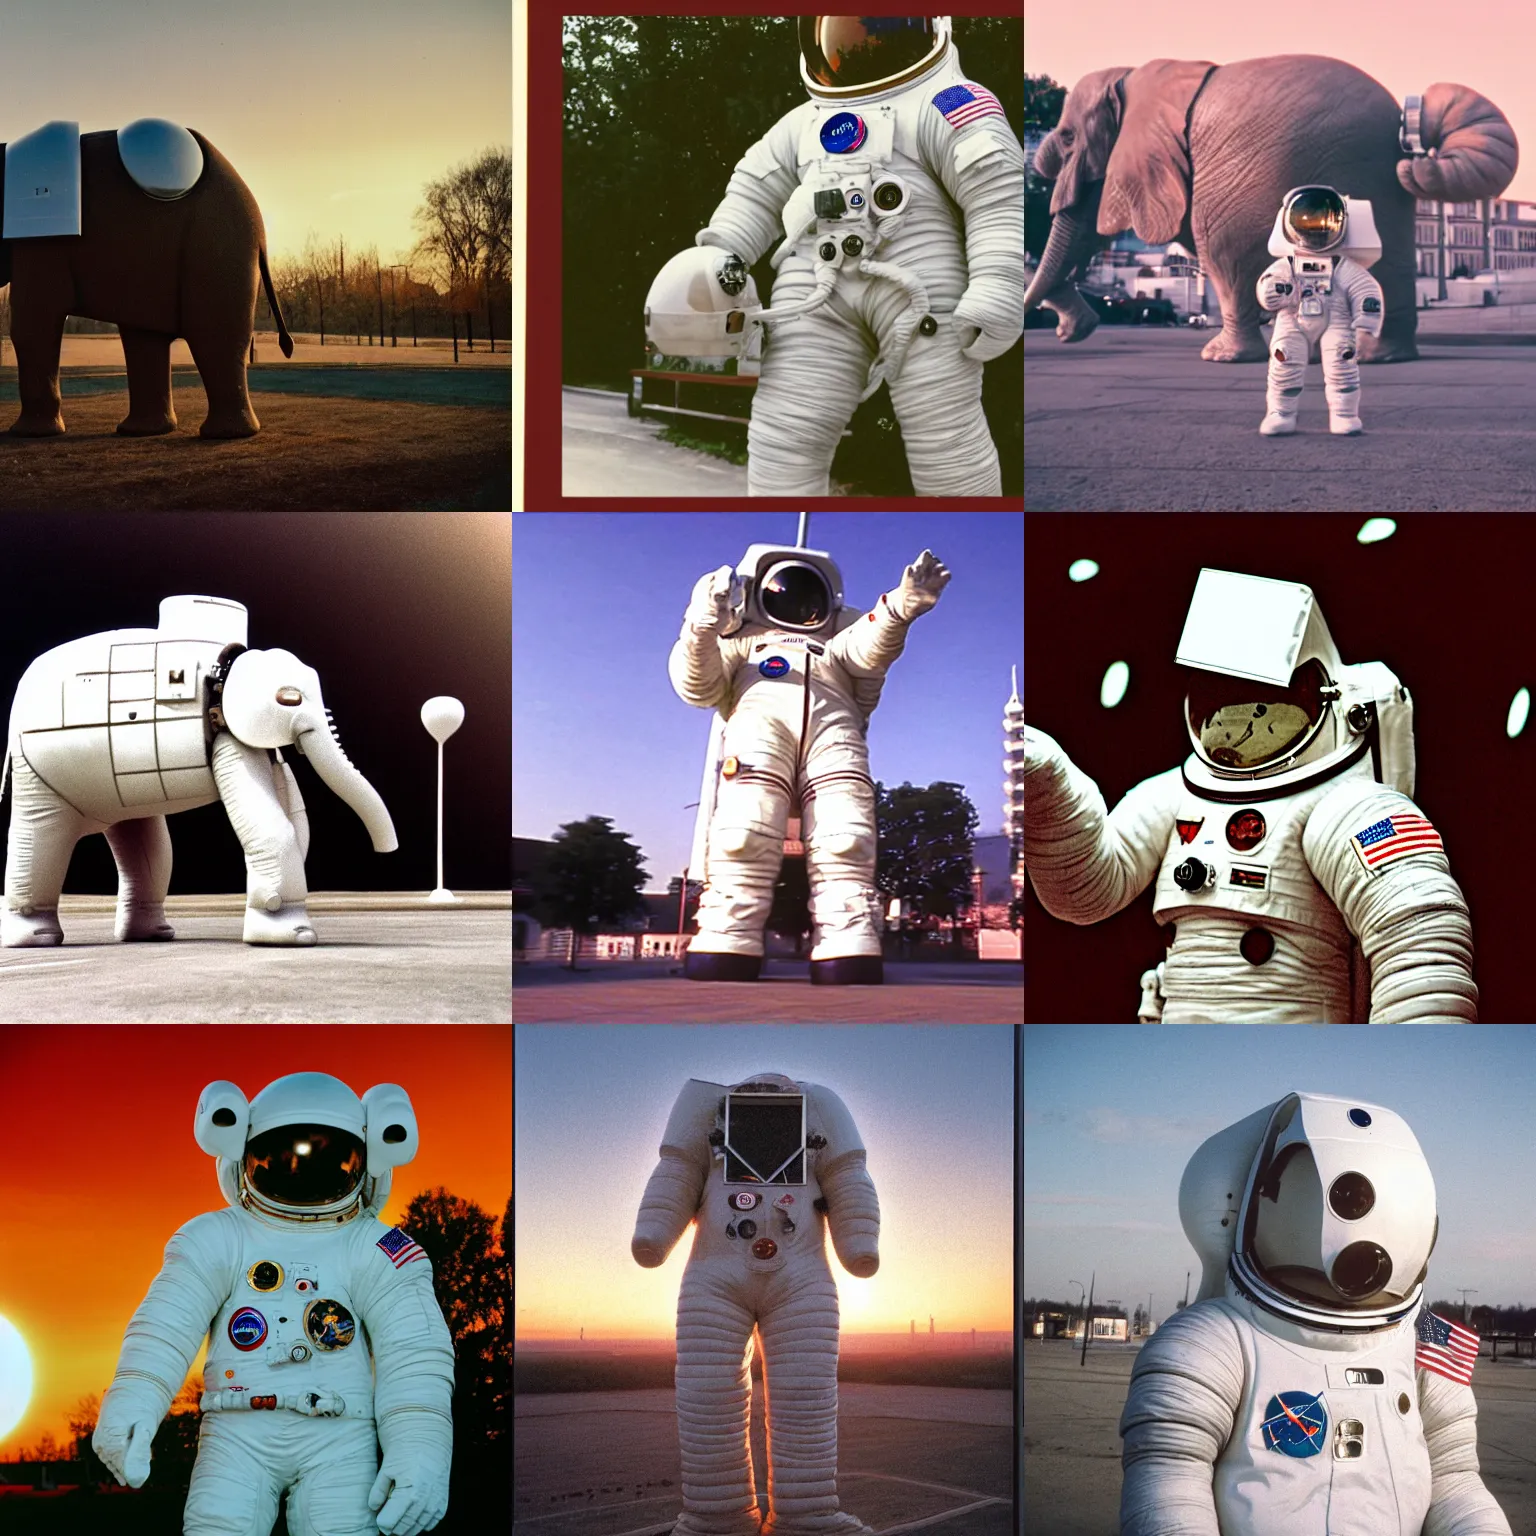 Prompt: shot on daghherotype, single subject, giant elephant wearing white custom made american spacesuit with oversized giant helmet as astronaut animal, in legnica, sunrise, by vhs camcoder